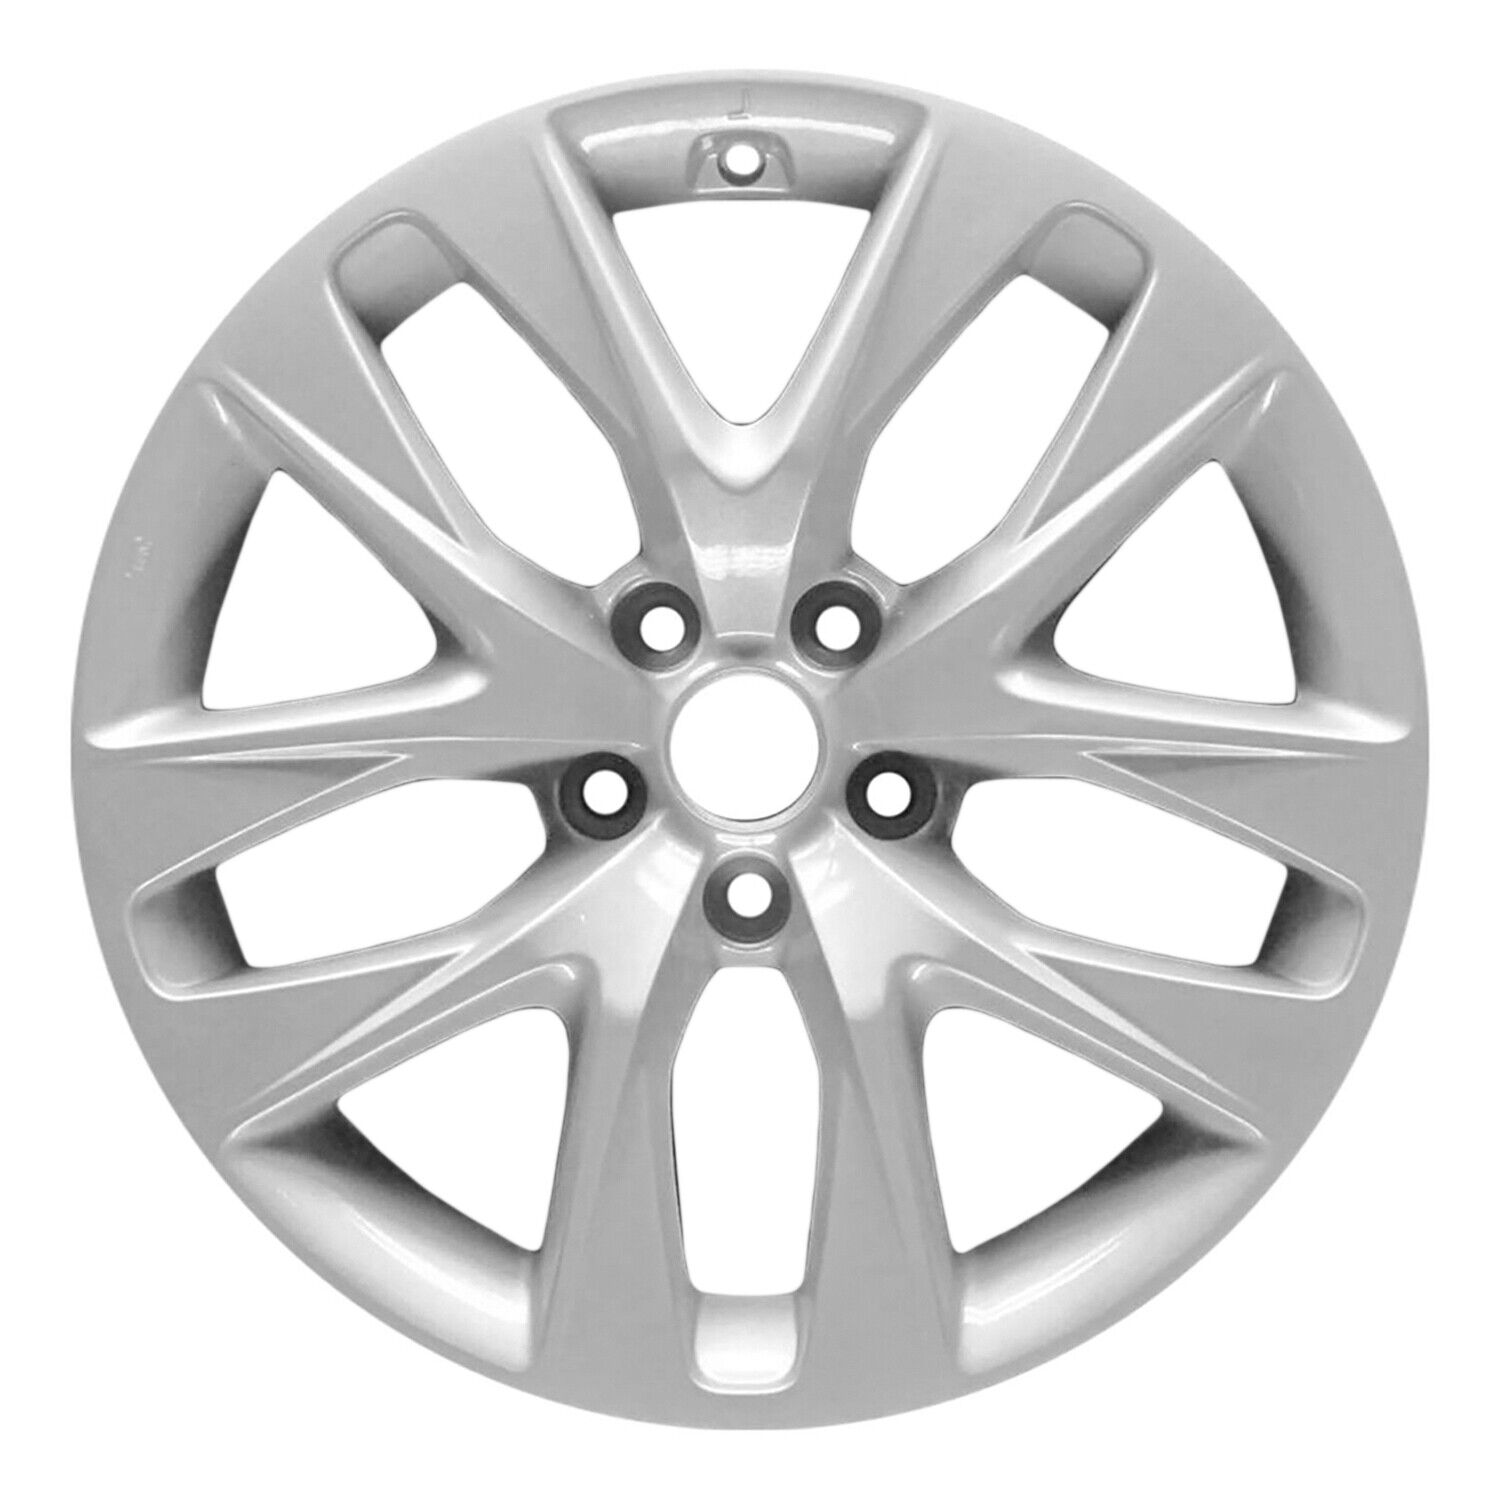 70839 Reconditioned OEM Front Aluminum Wheel 18x7.5 fits 2013-2016 Genesis Coupe